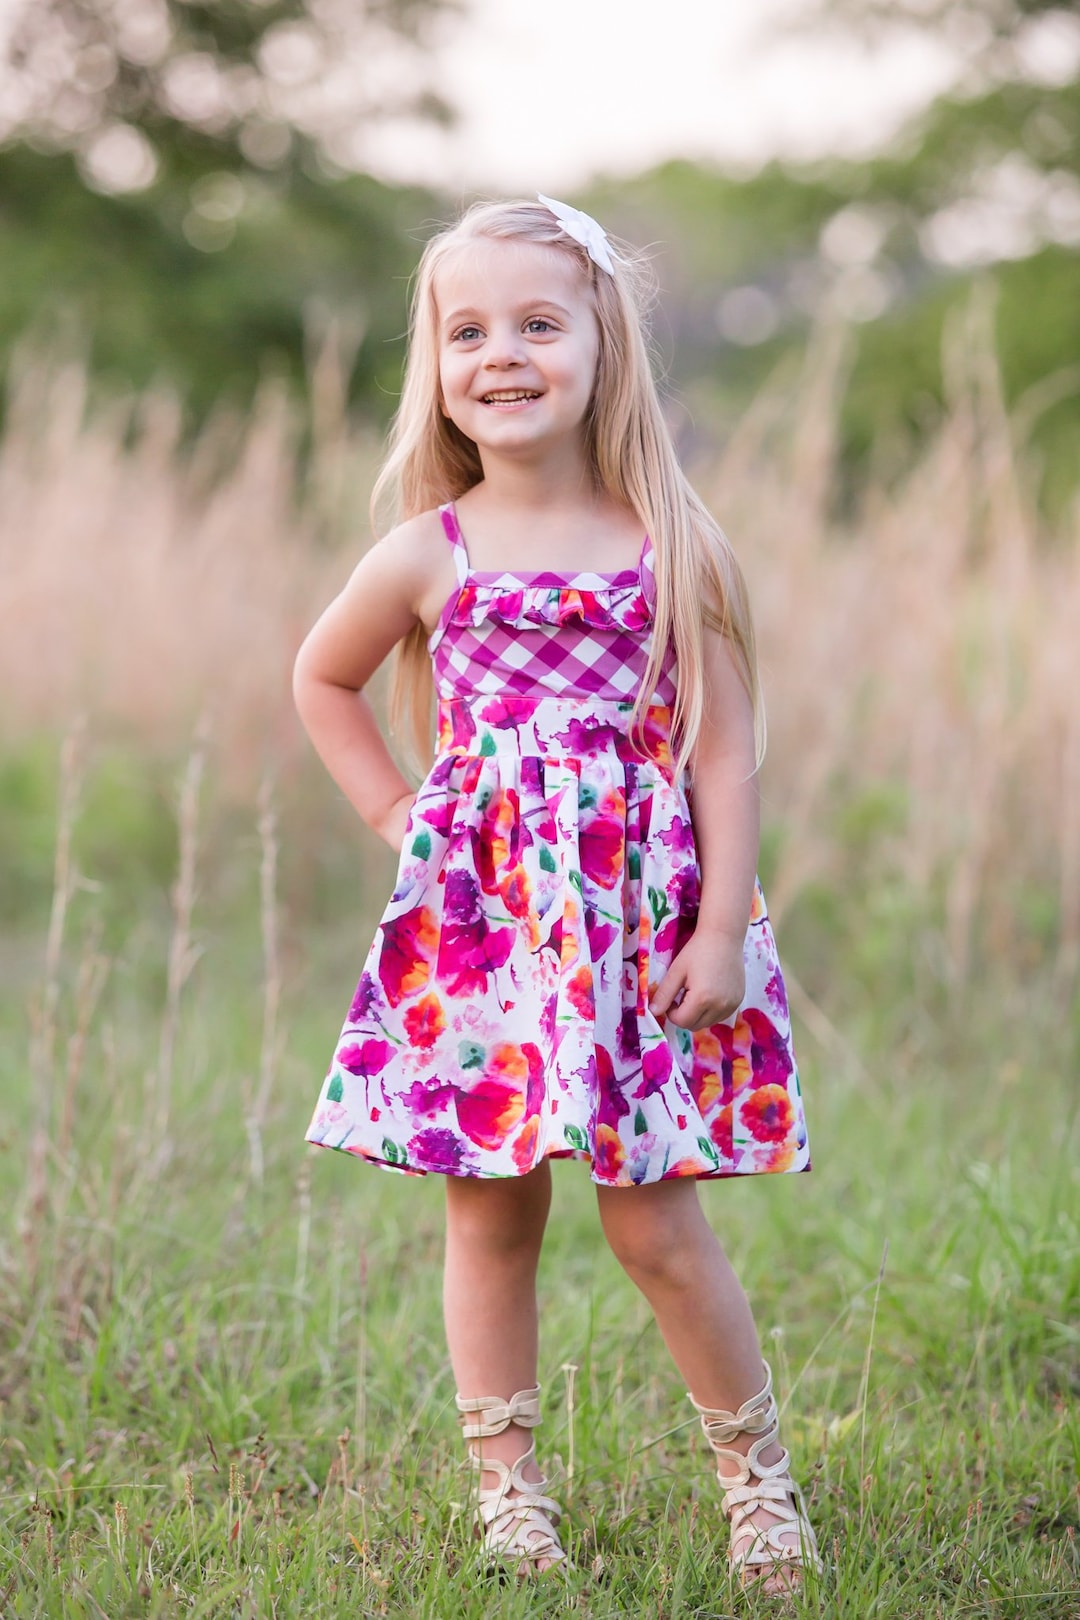 Elba Dress and Top PDF Sewing Pattern, Including Sizes 12 Months-14 ...